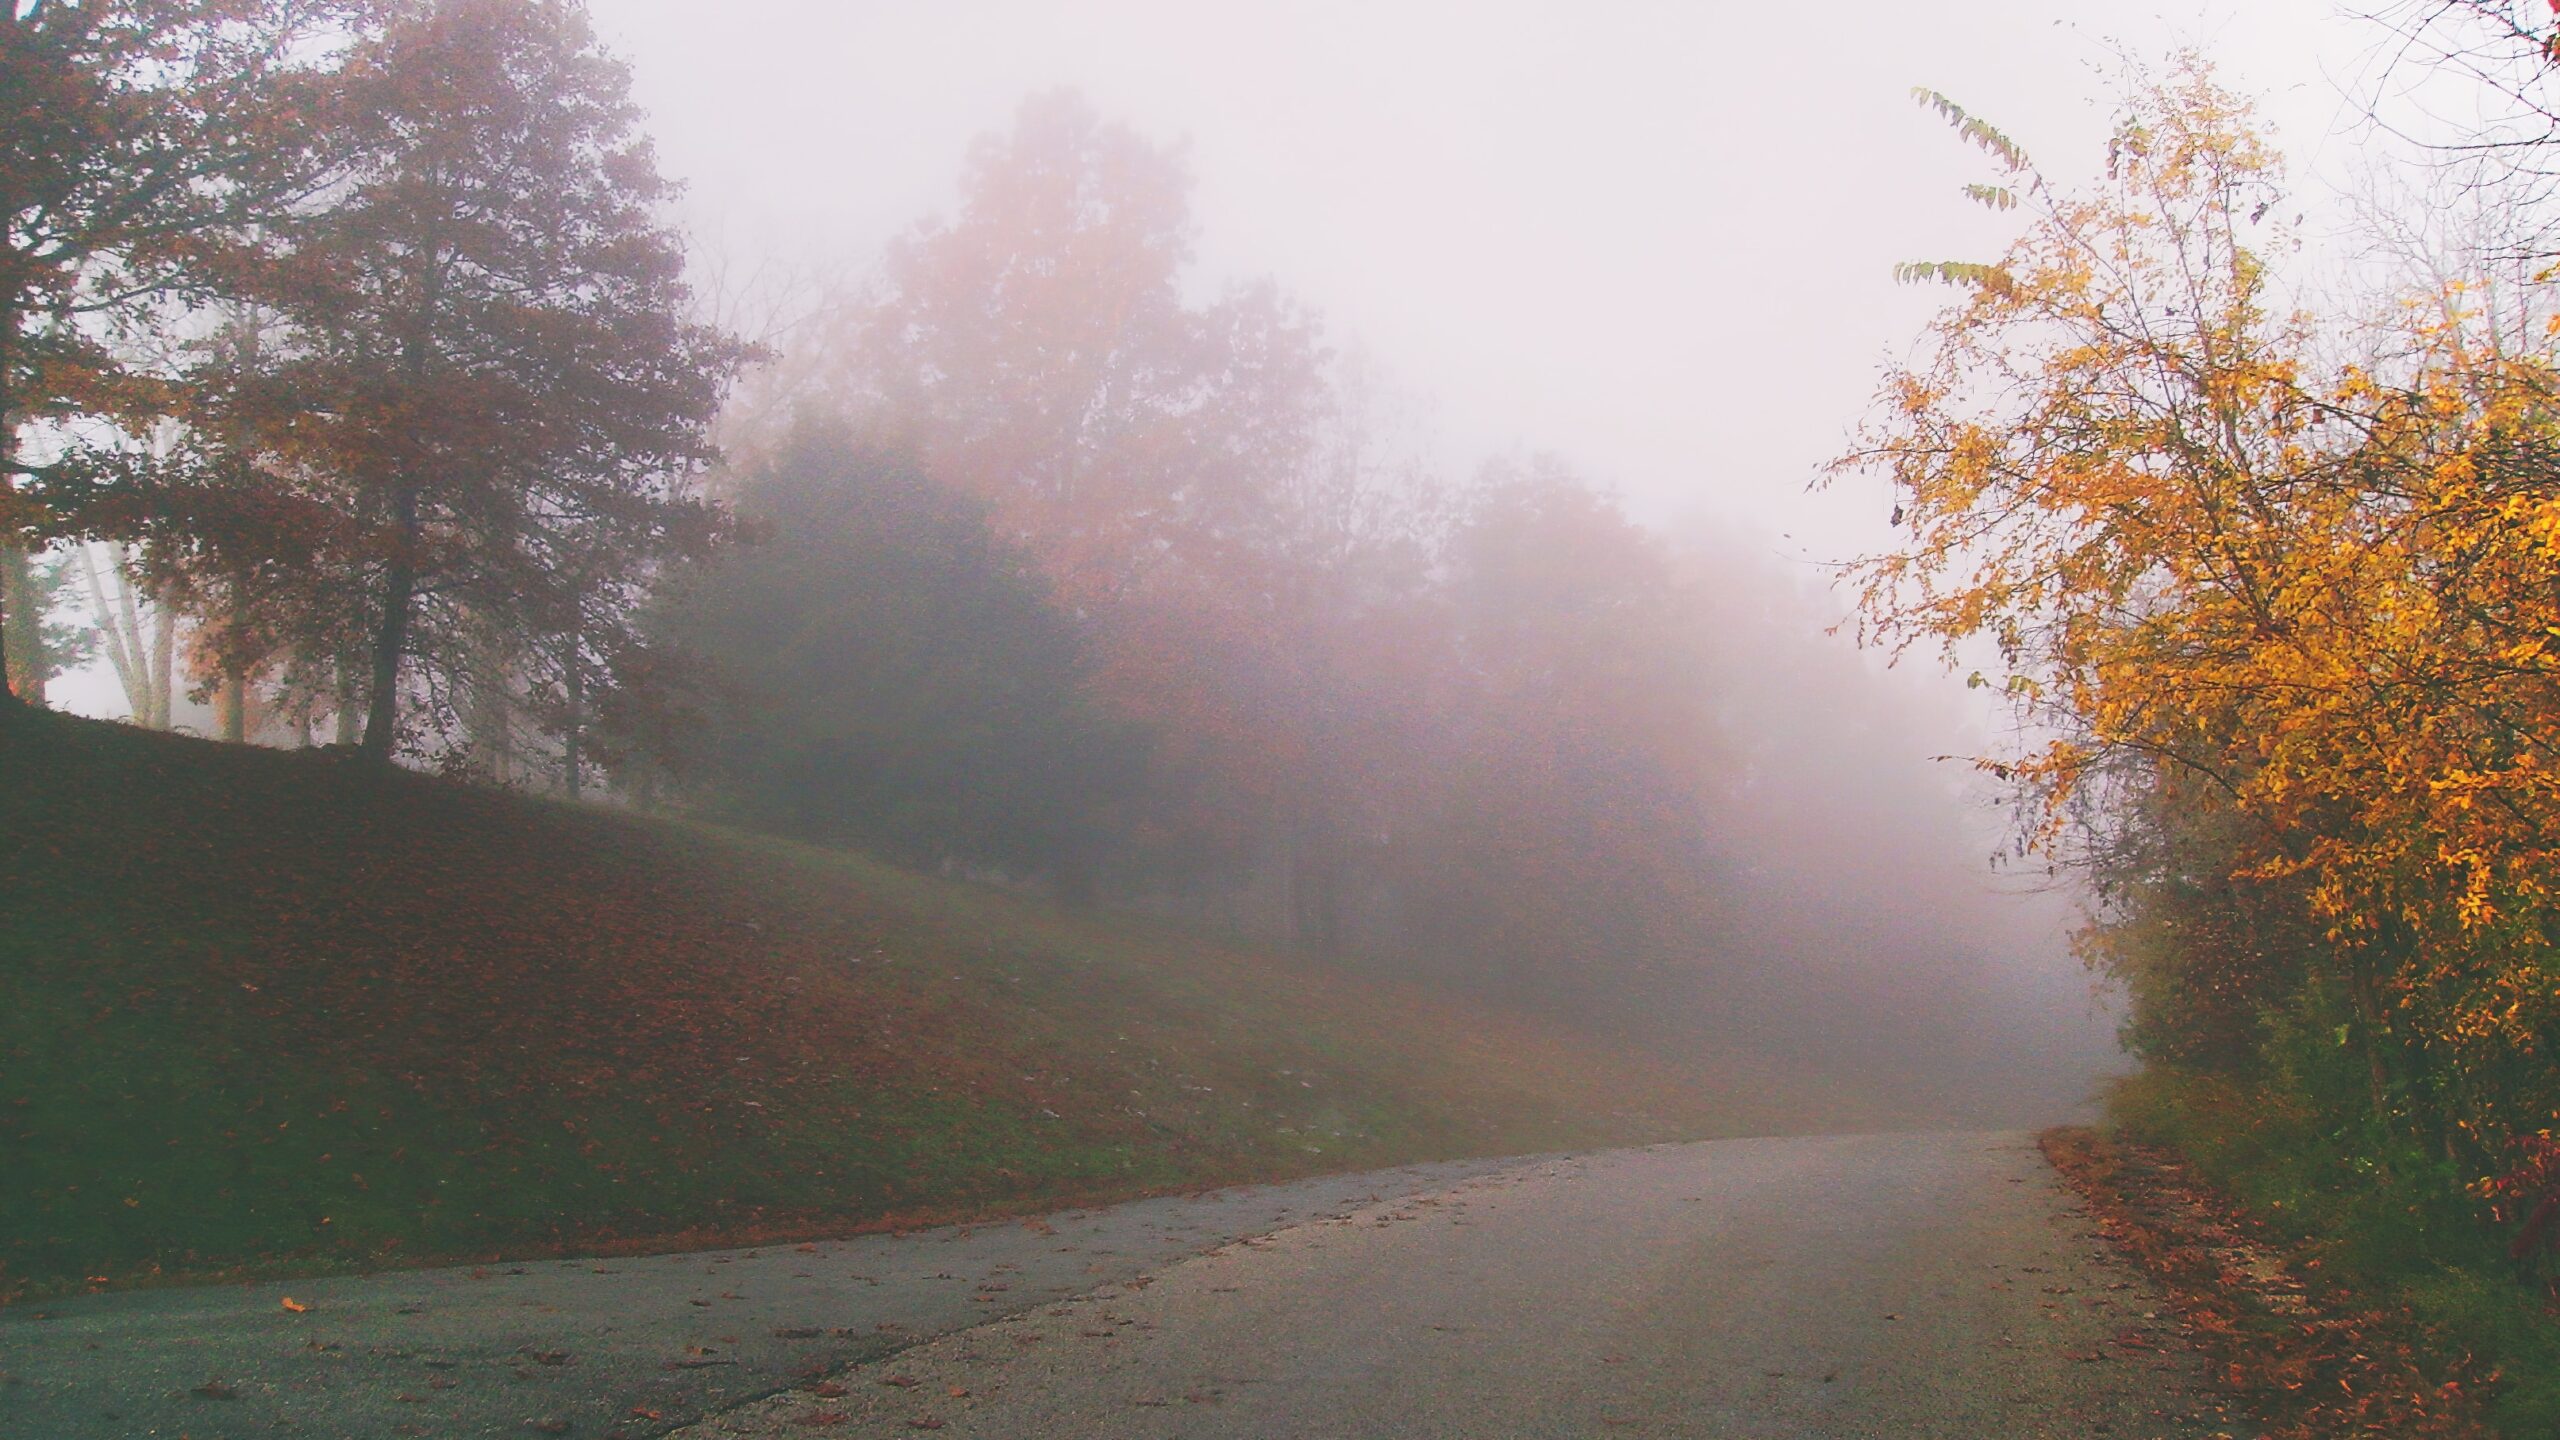 Silver Dollar City is an exciting theme park in Missouri that travelers should not have a problem locating. 
Pictured: a foggy Branson, Missouri road during the fall 